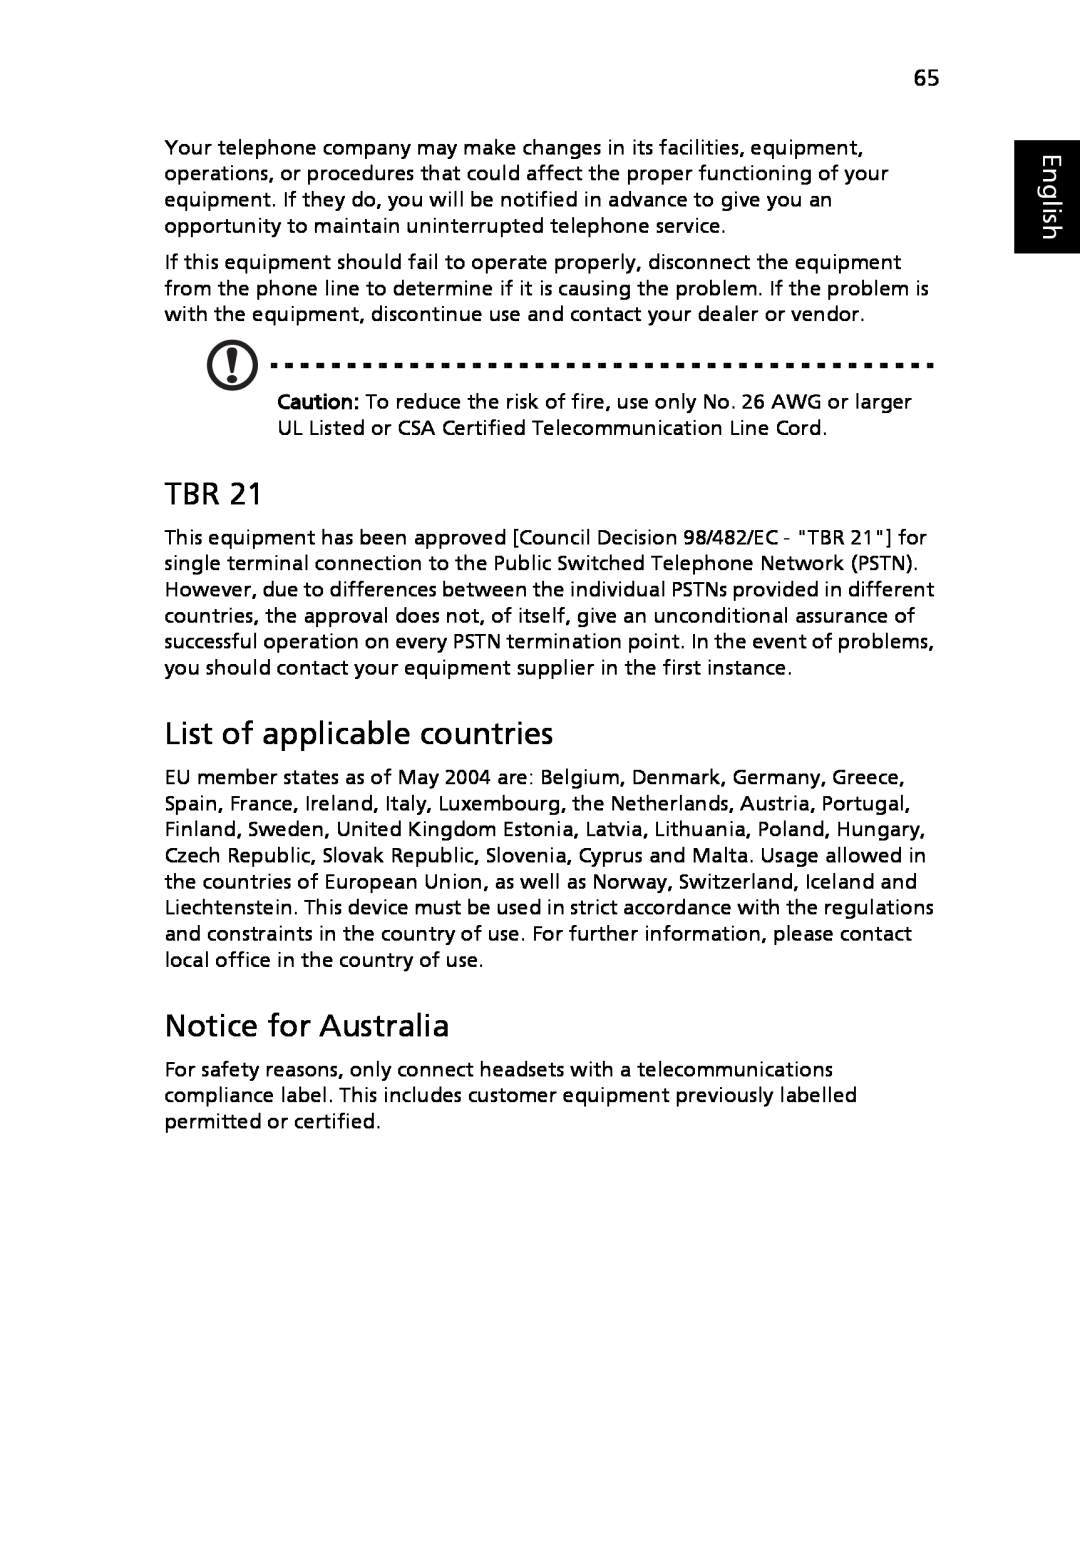 Acer 6492 Series, 6492G manual List of applicable countries, Notice for Australia, English 